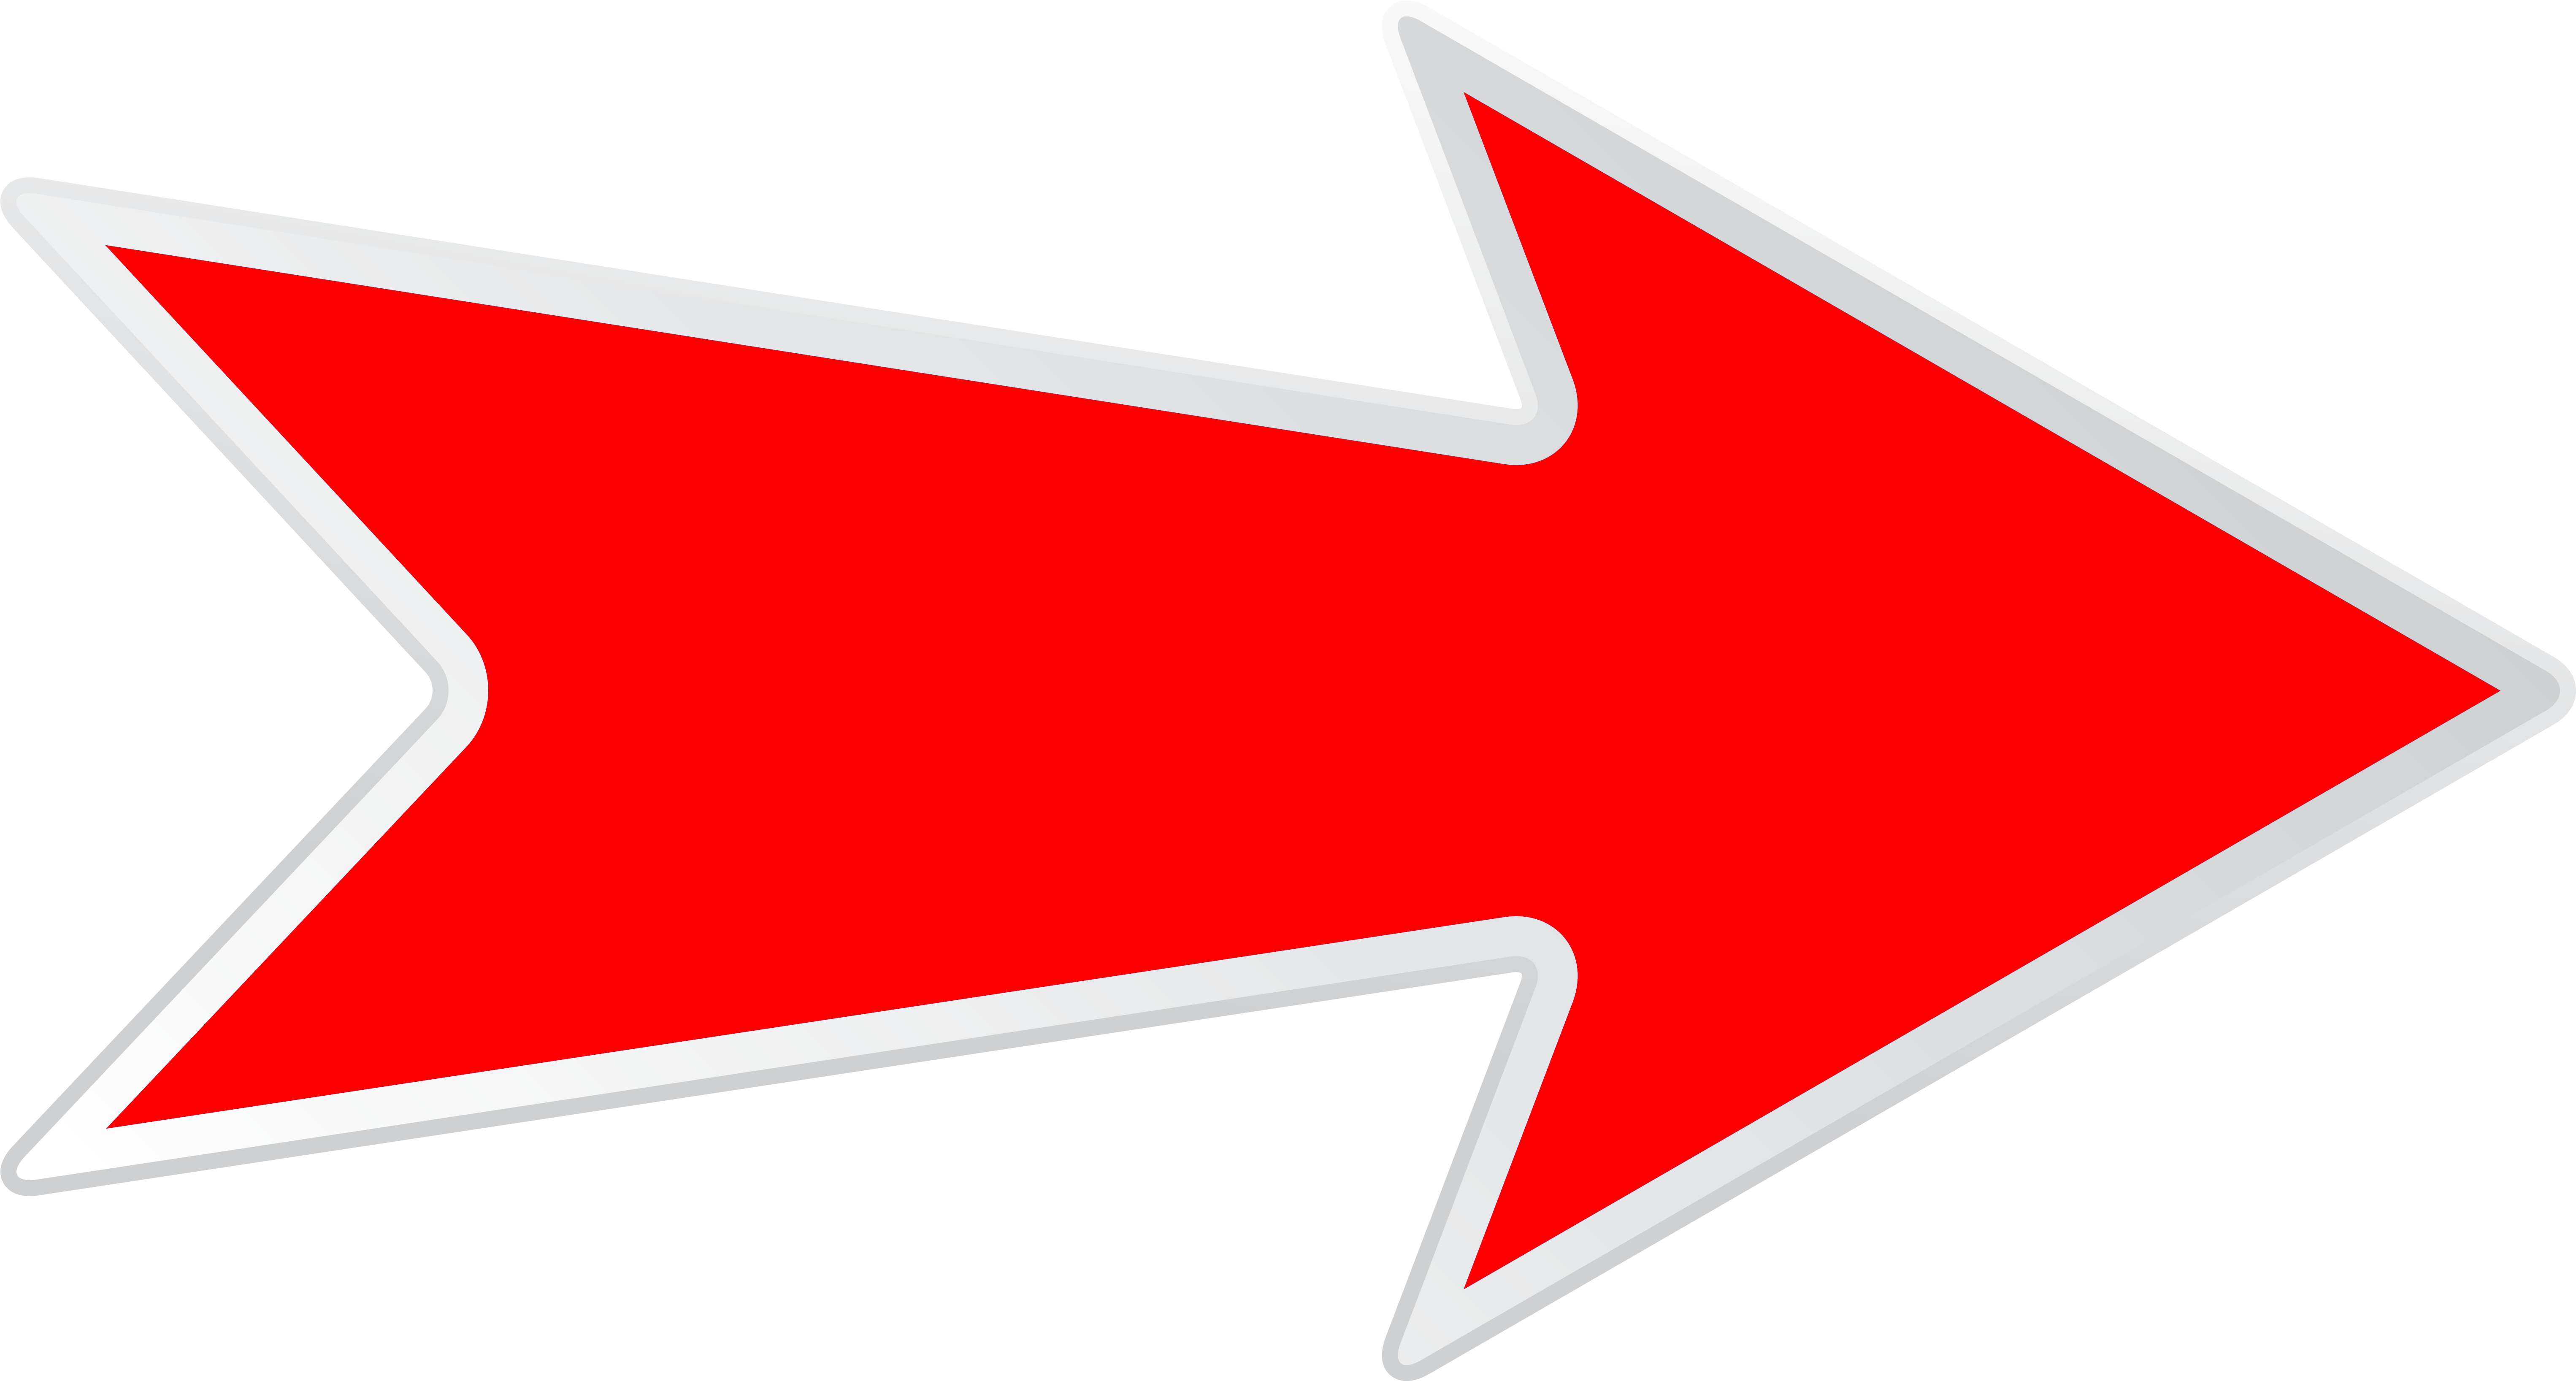 Post - Red Arrow Icon Transparent Background (6273x3361)